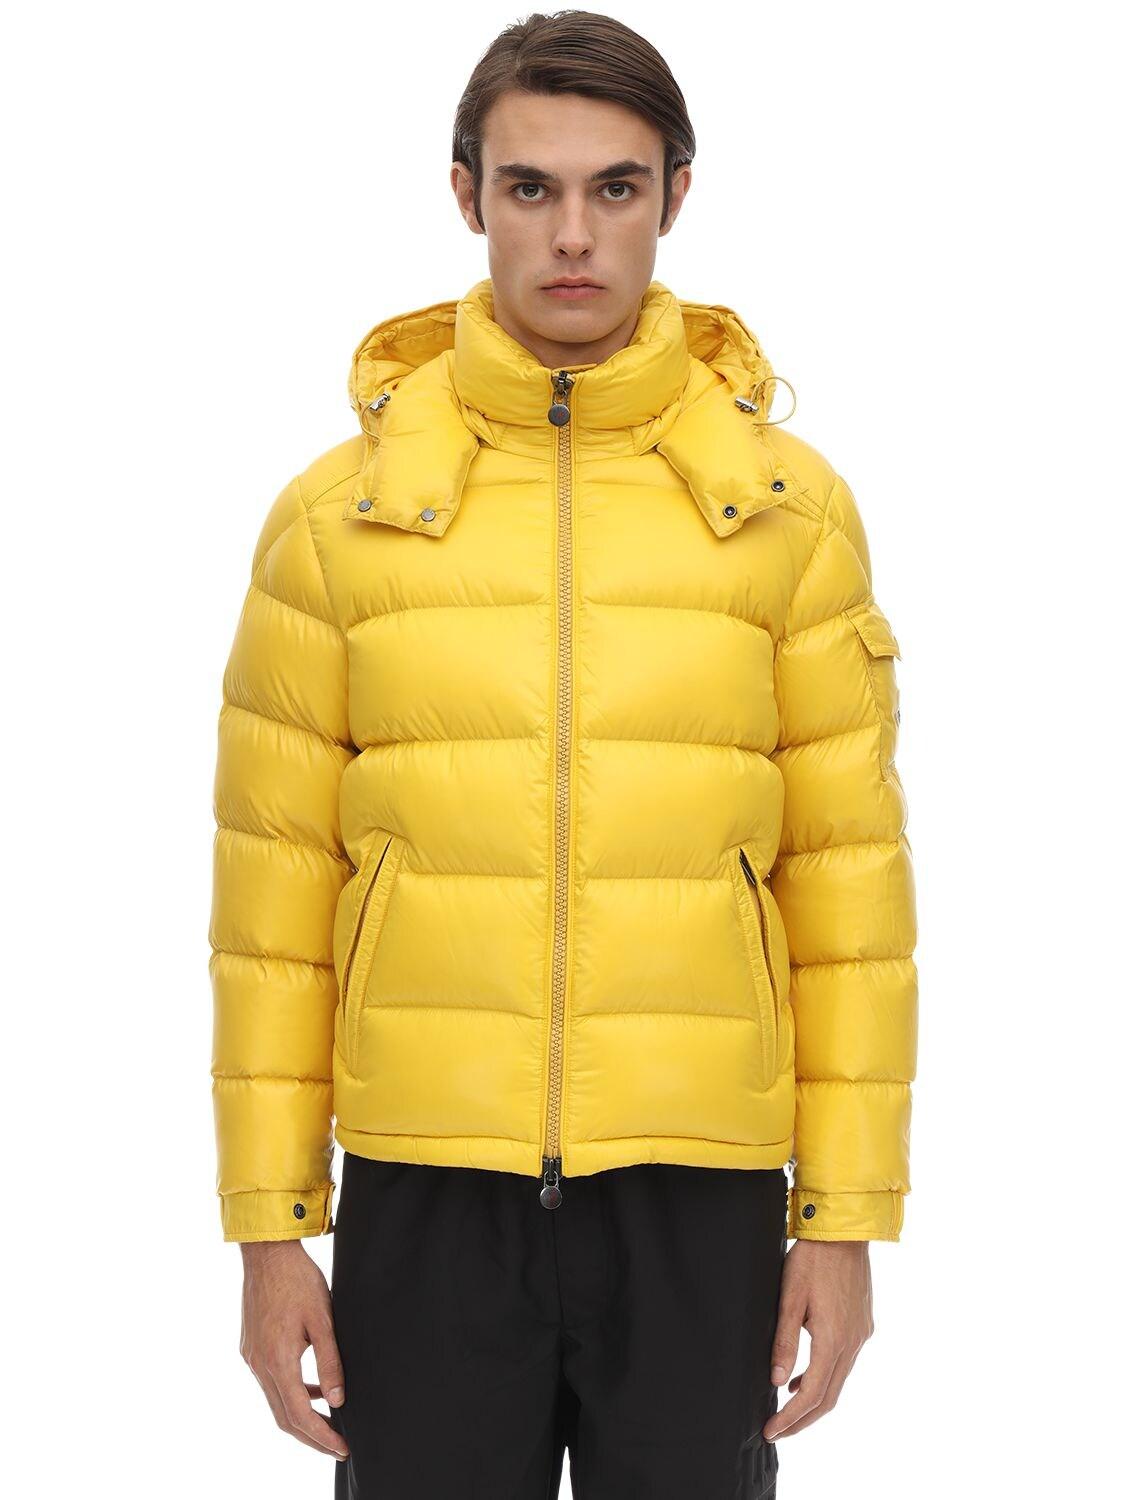 Moncler Synthetic Maya Down Jacket in Yellow for Men - Lyst